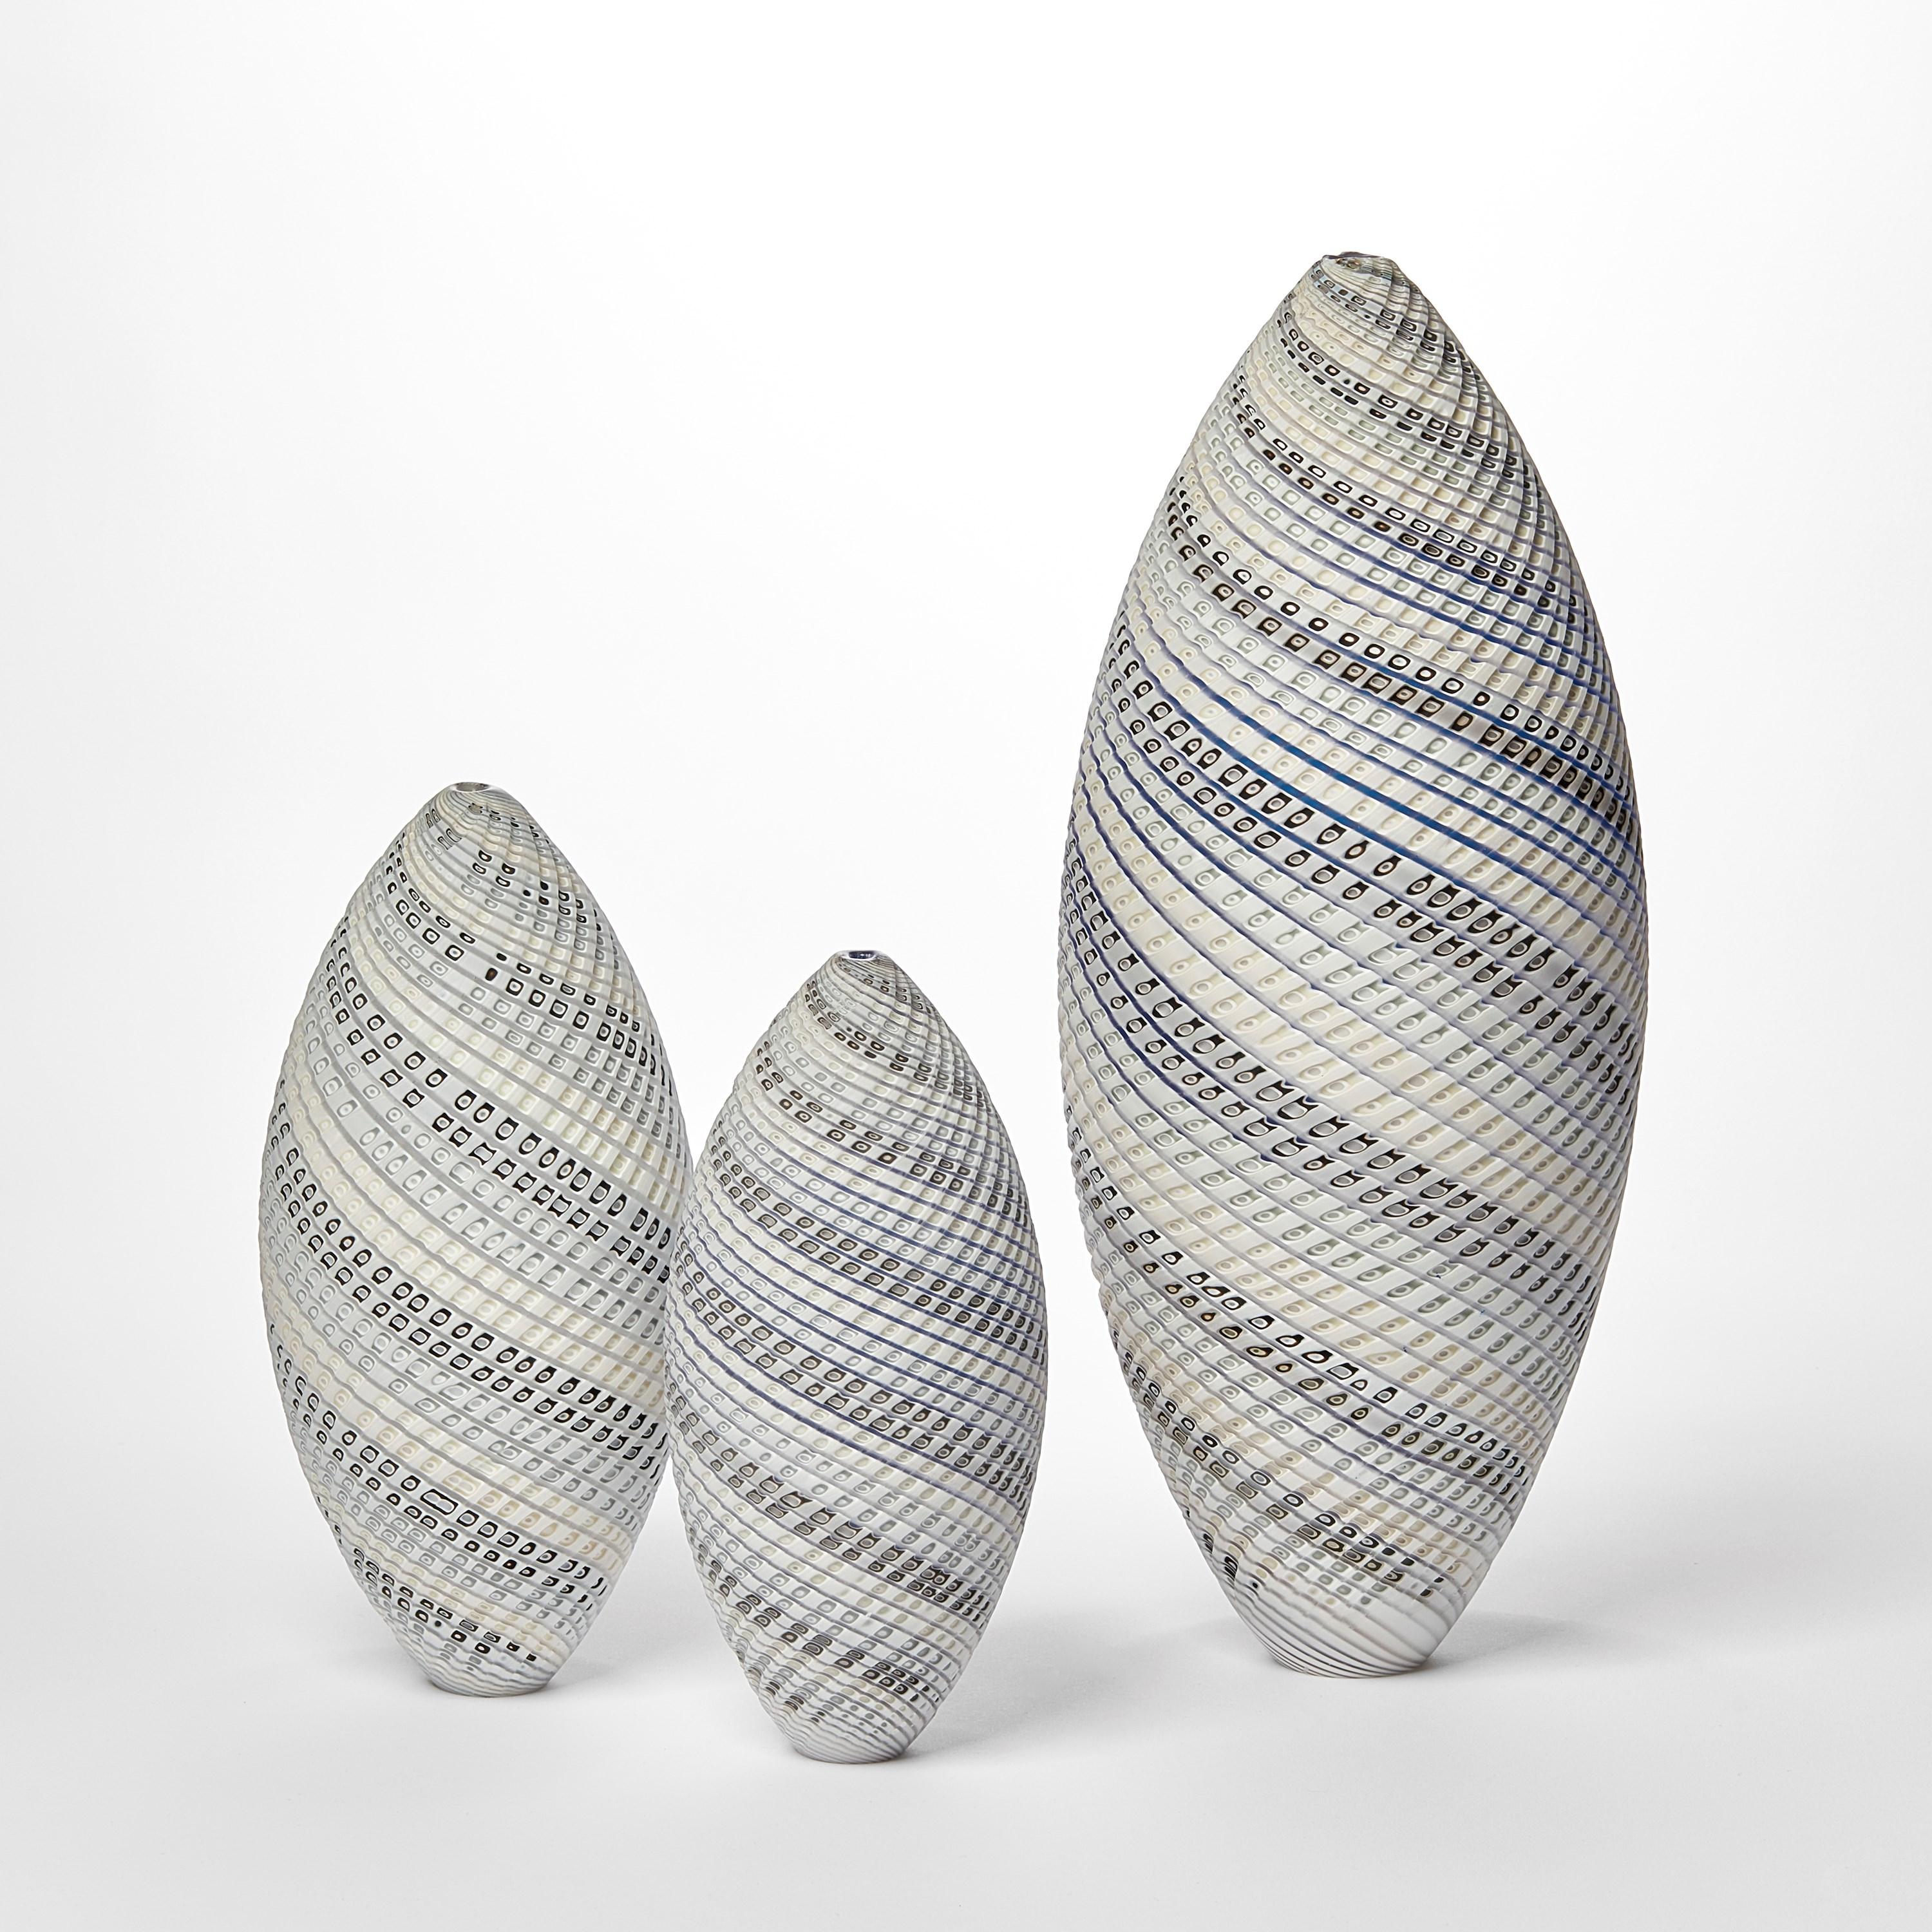 Woven Three Tone Blue Ovoid (sm), textured handblown glass vessel by Layne Rowe In New Condition For Sale In London, GB